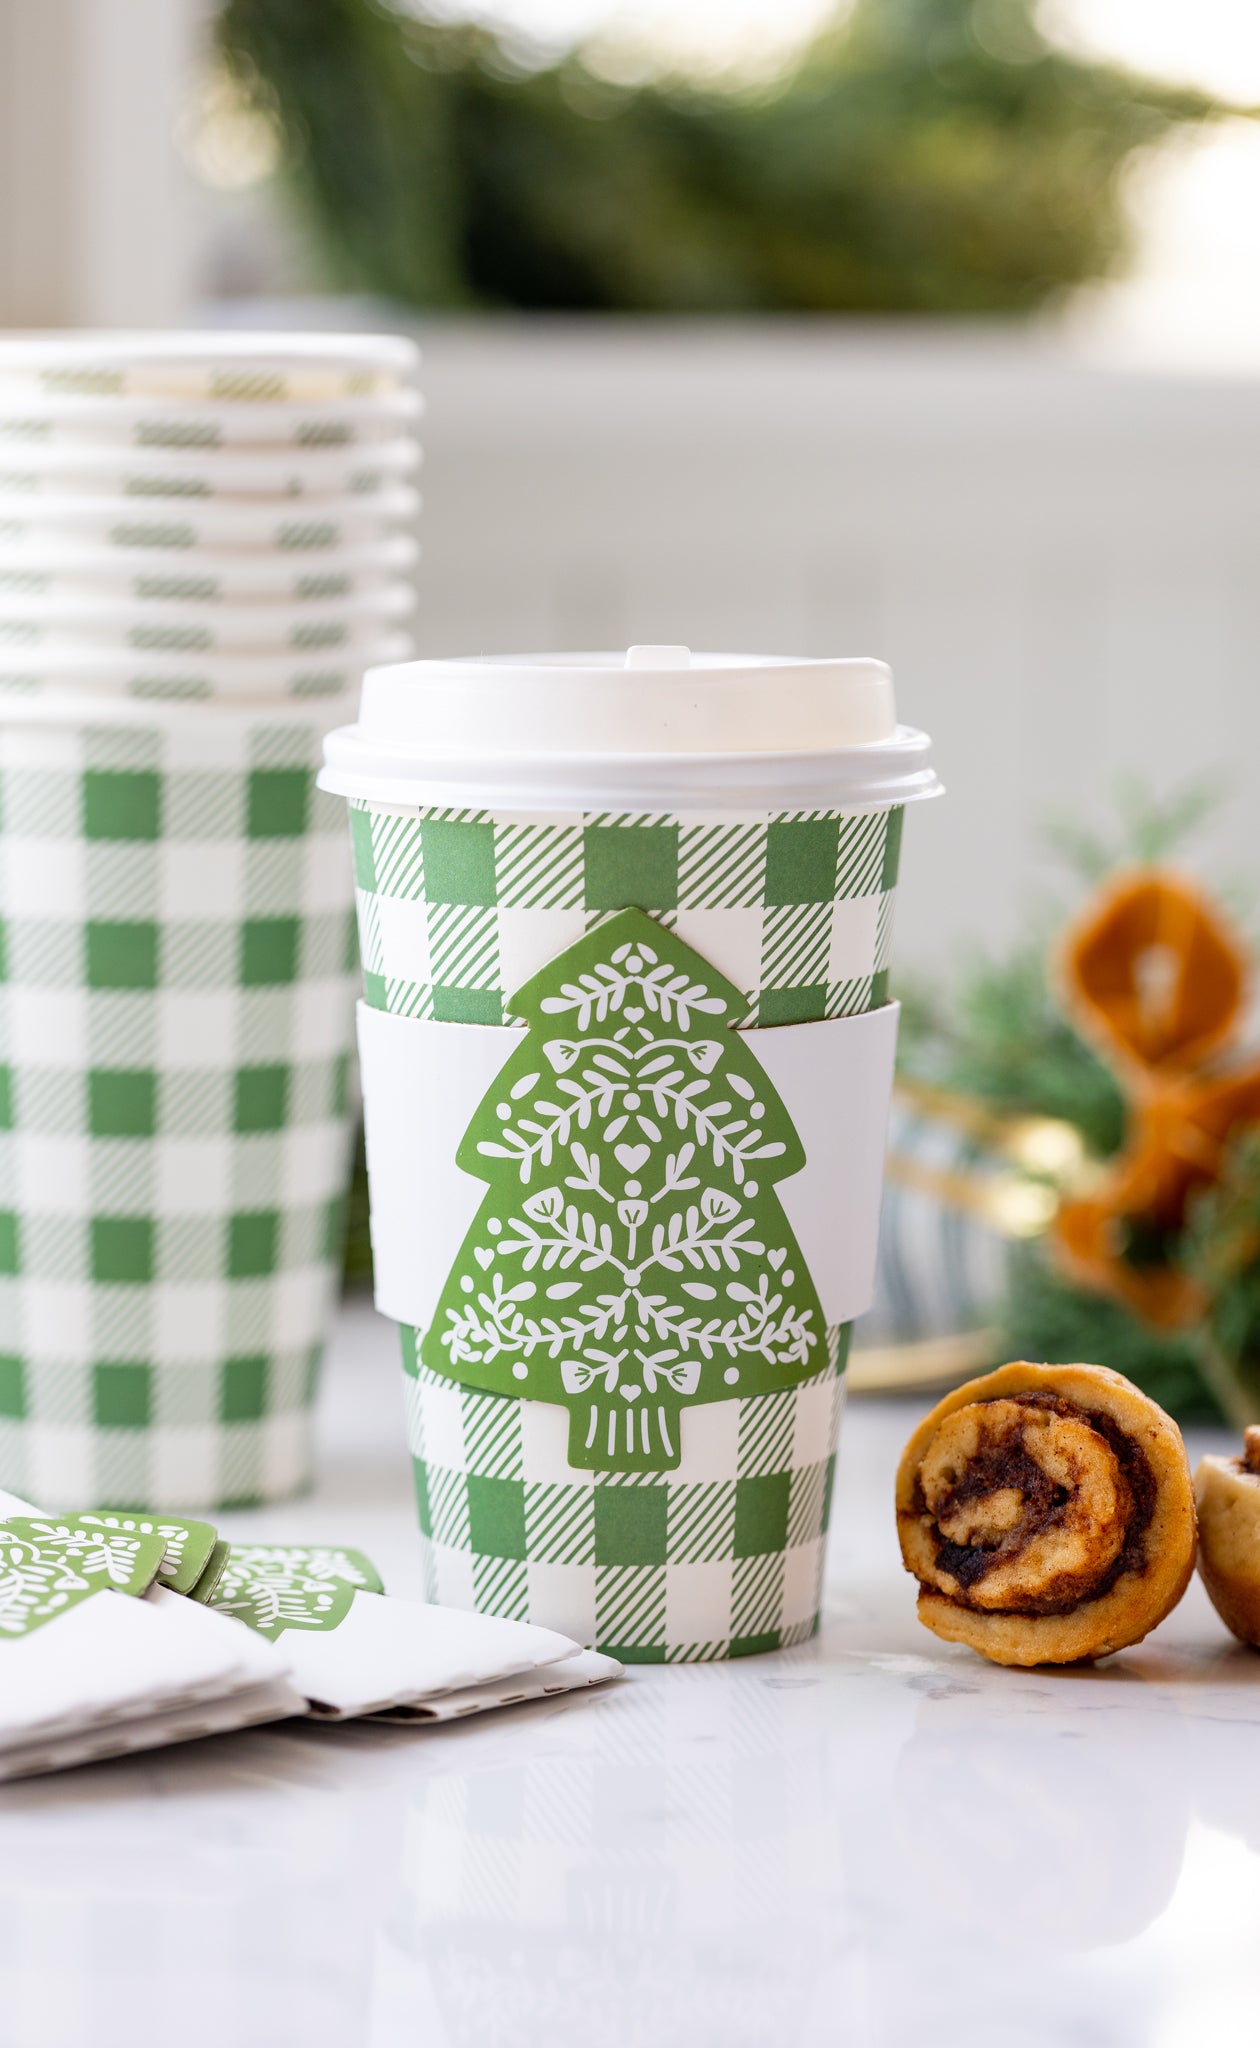 PLTG282A - Green Christmas Tree Plaid To-Go Cups 8 ct